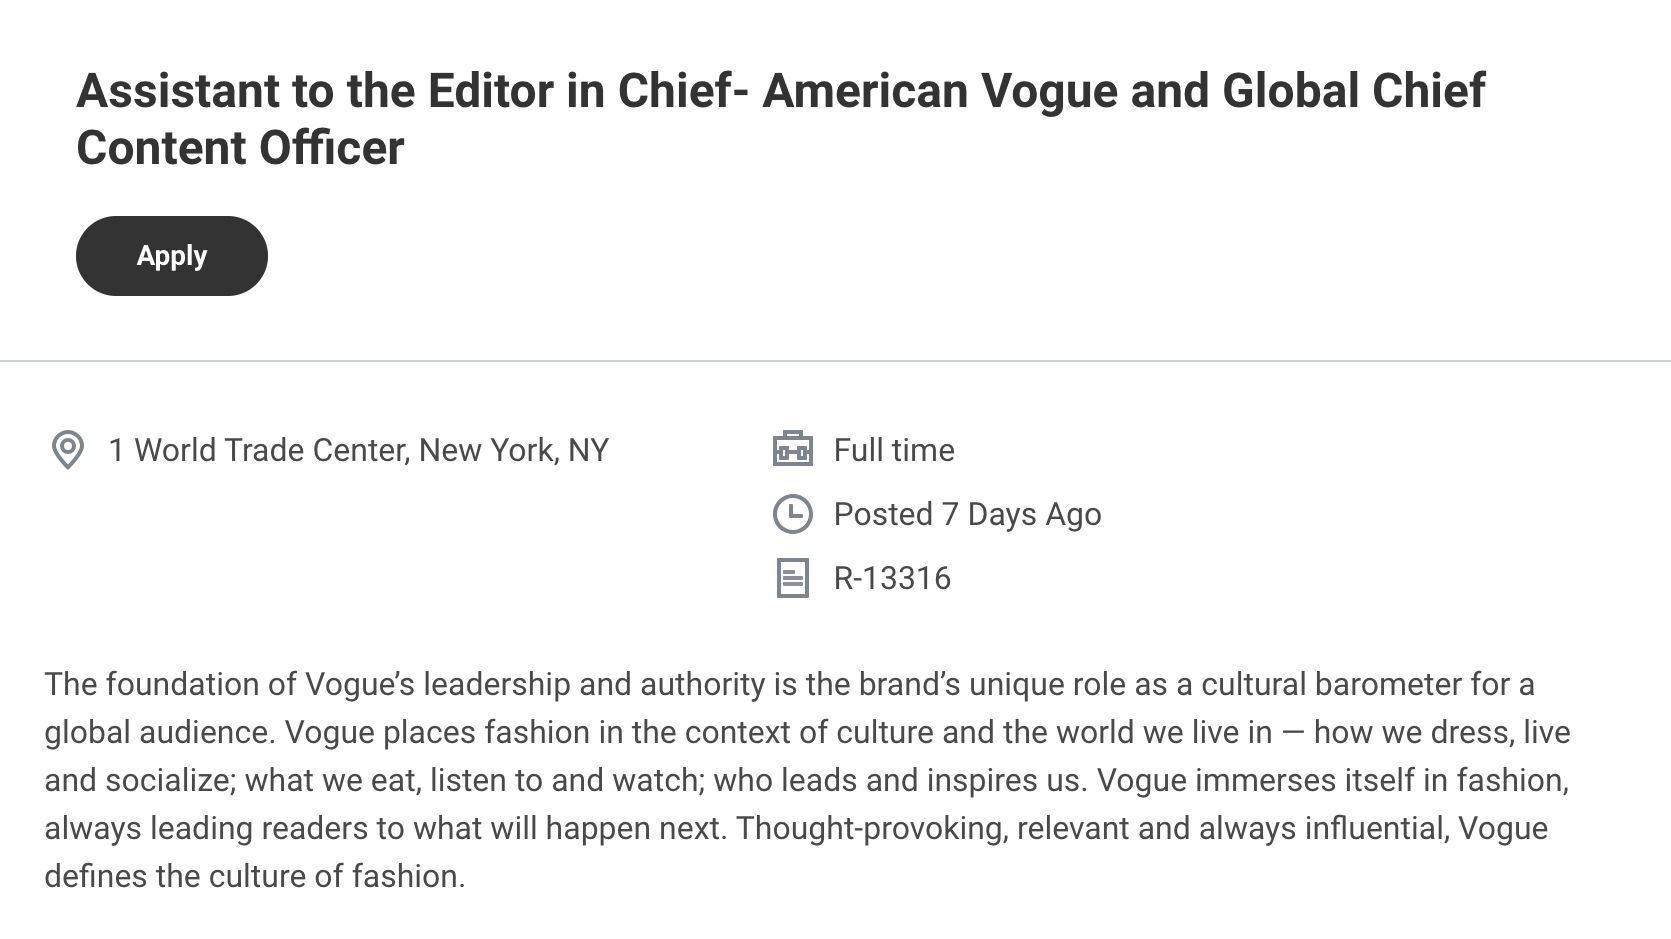 &quot;Assistant to the Editor in Chief- American Vogue and Global Chief Content Officer&quot;